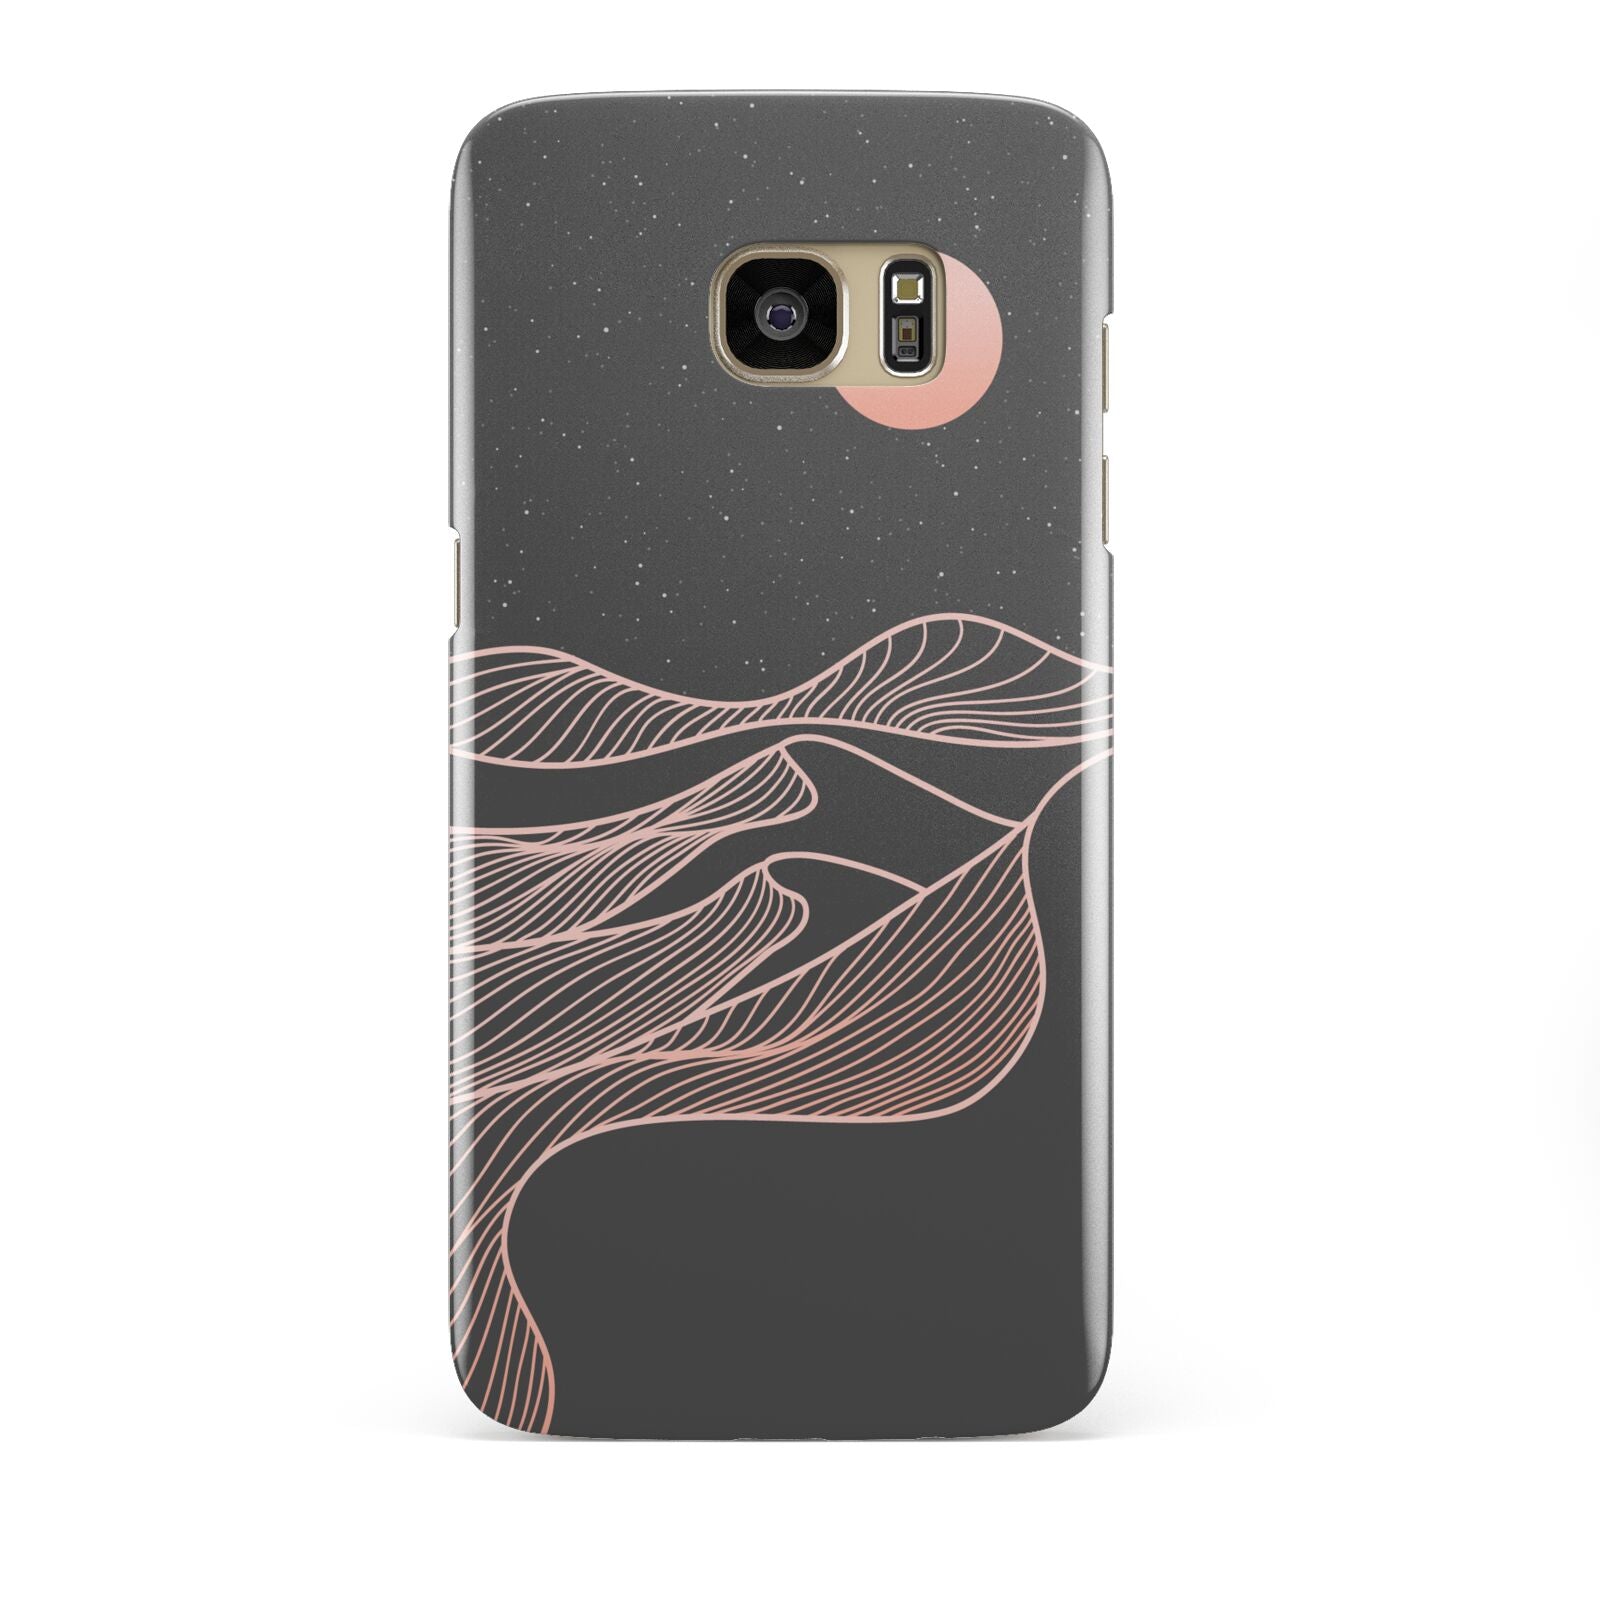 Abstract Sunset Samsung Galaxy S7 Edge Case